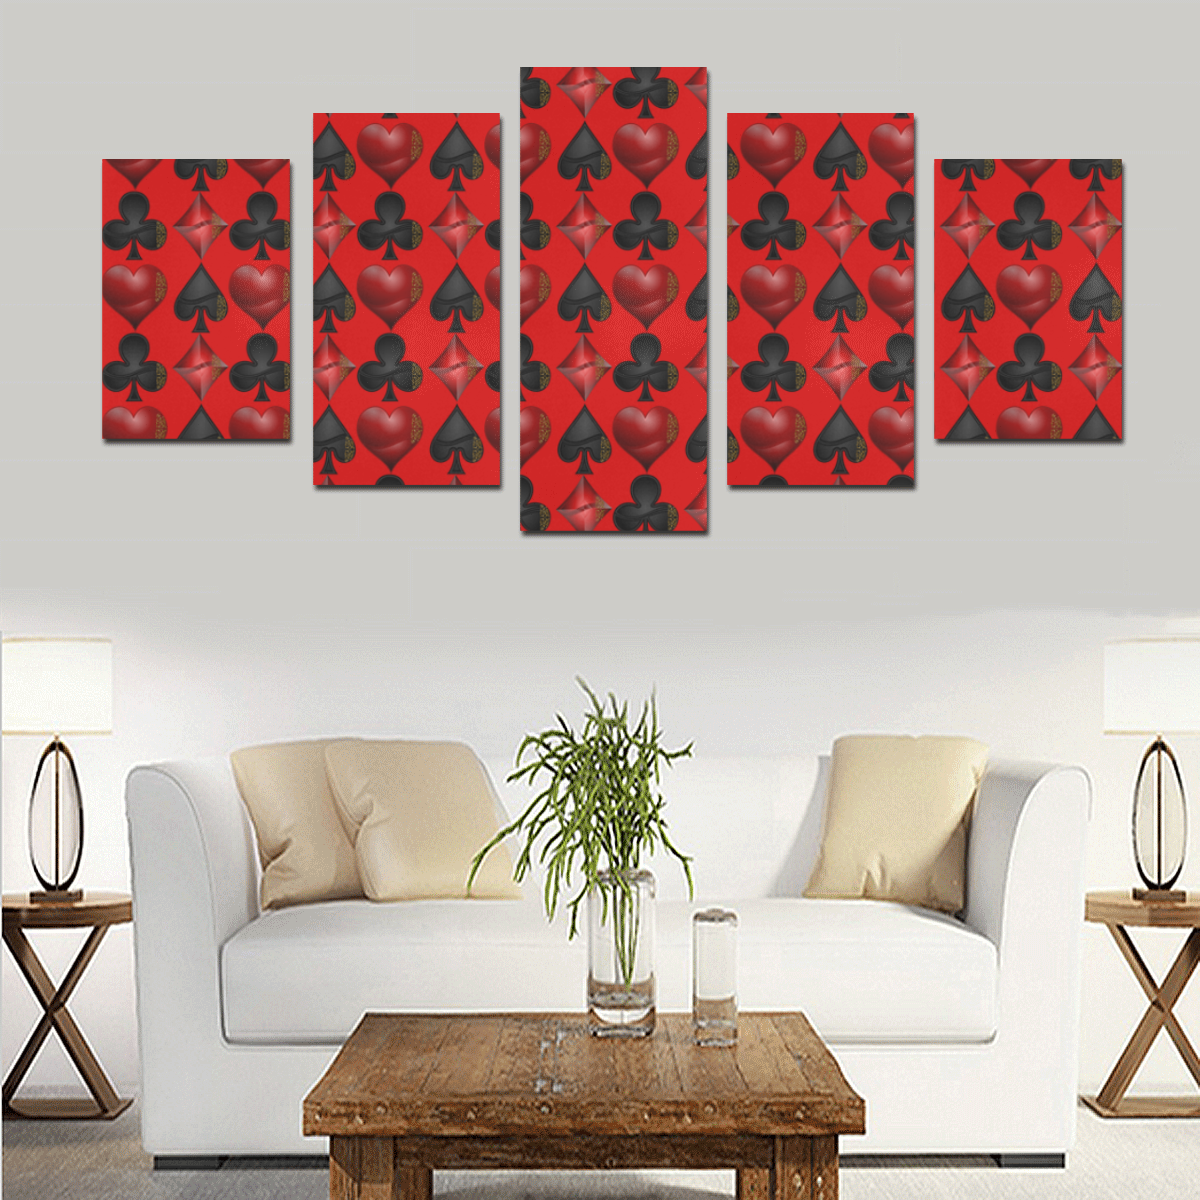 Las Vegas Black and Red Casino Poker Card Shapes on Red Canvas Print Sets D (No Frame)